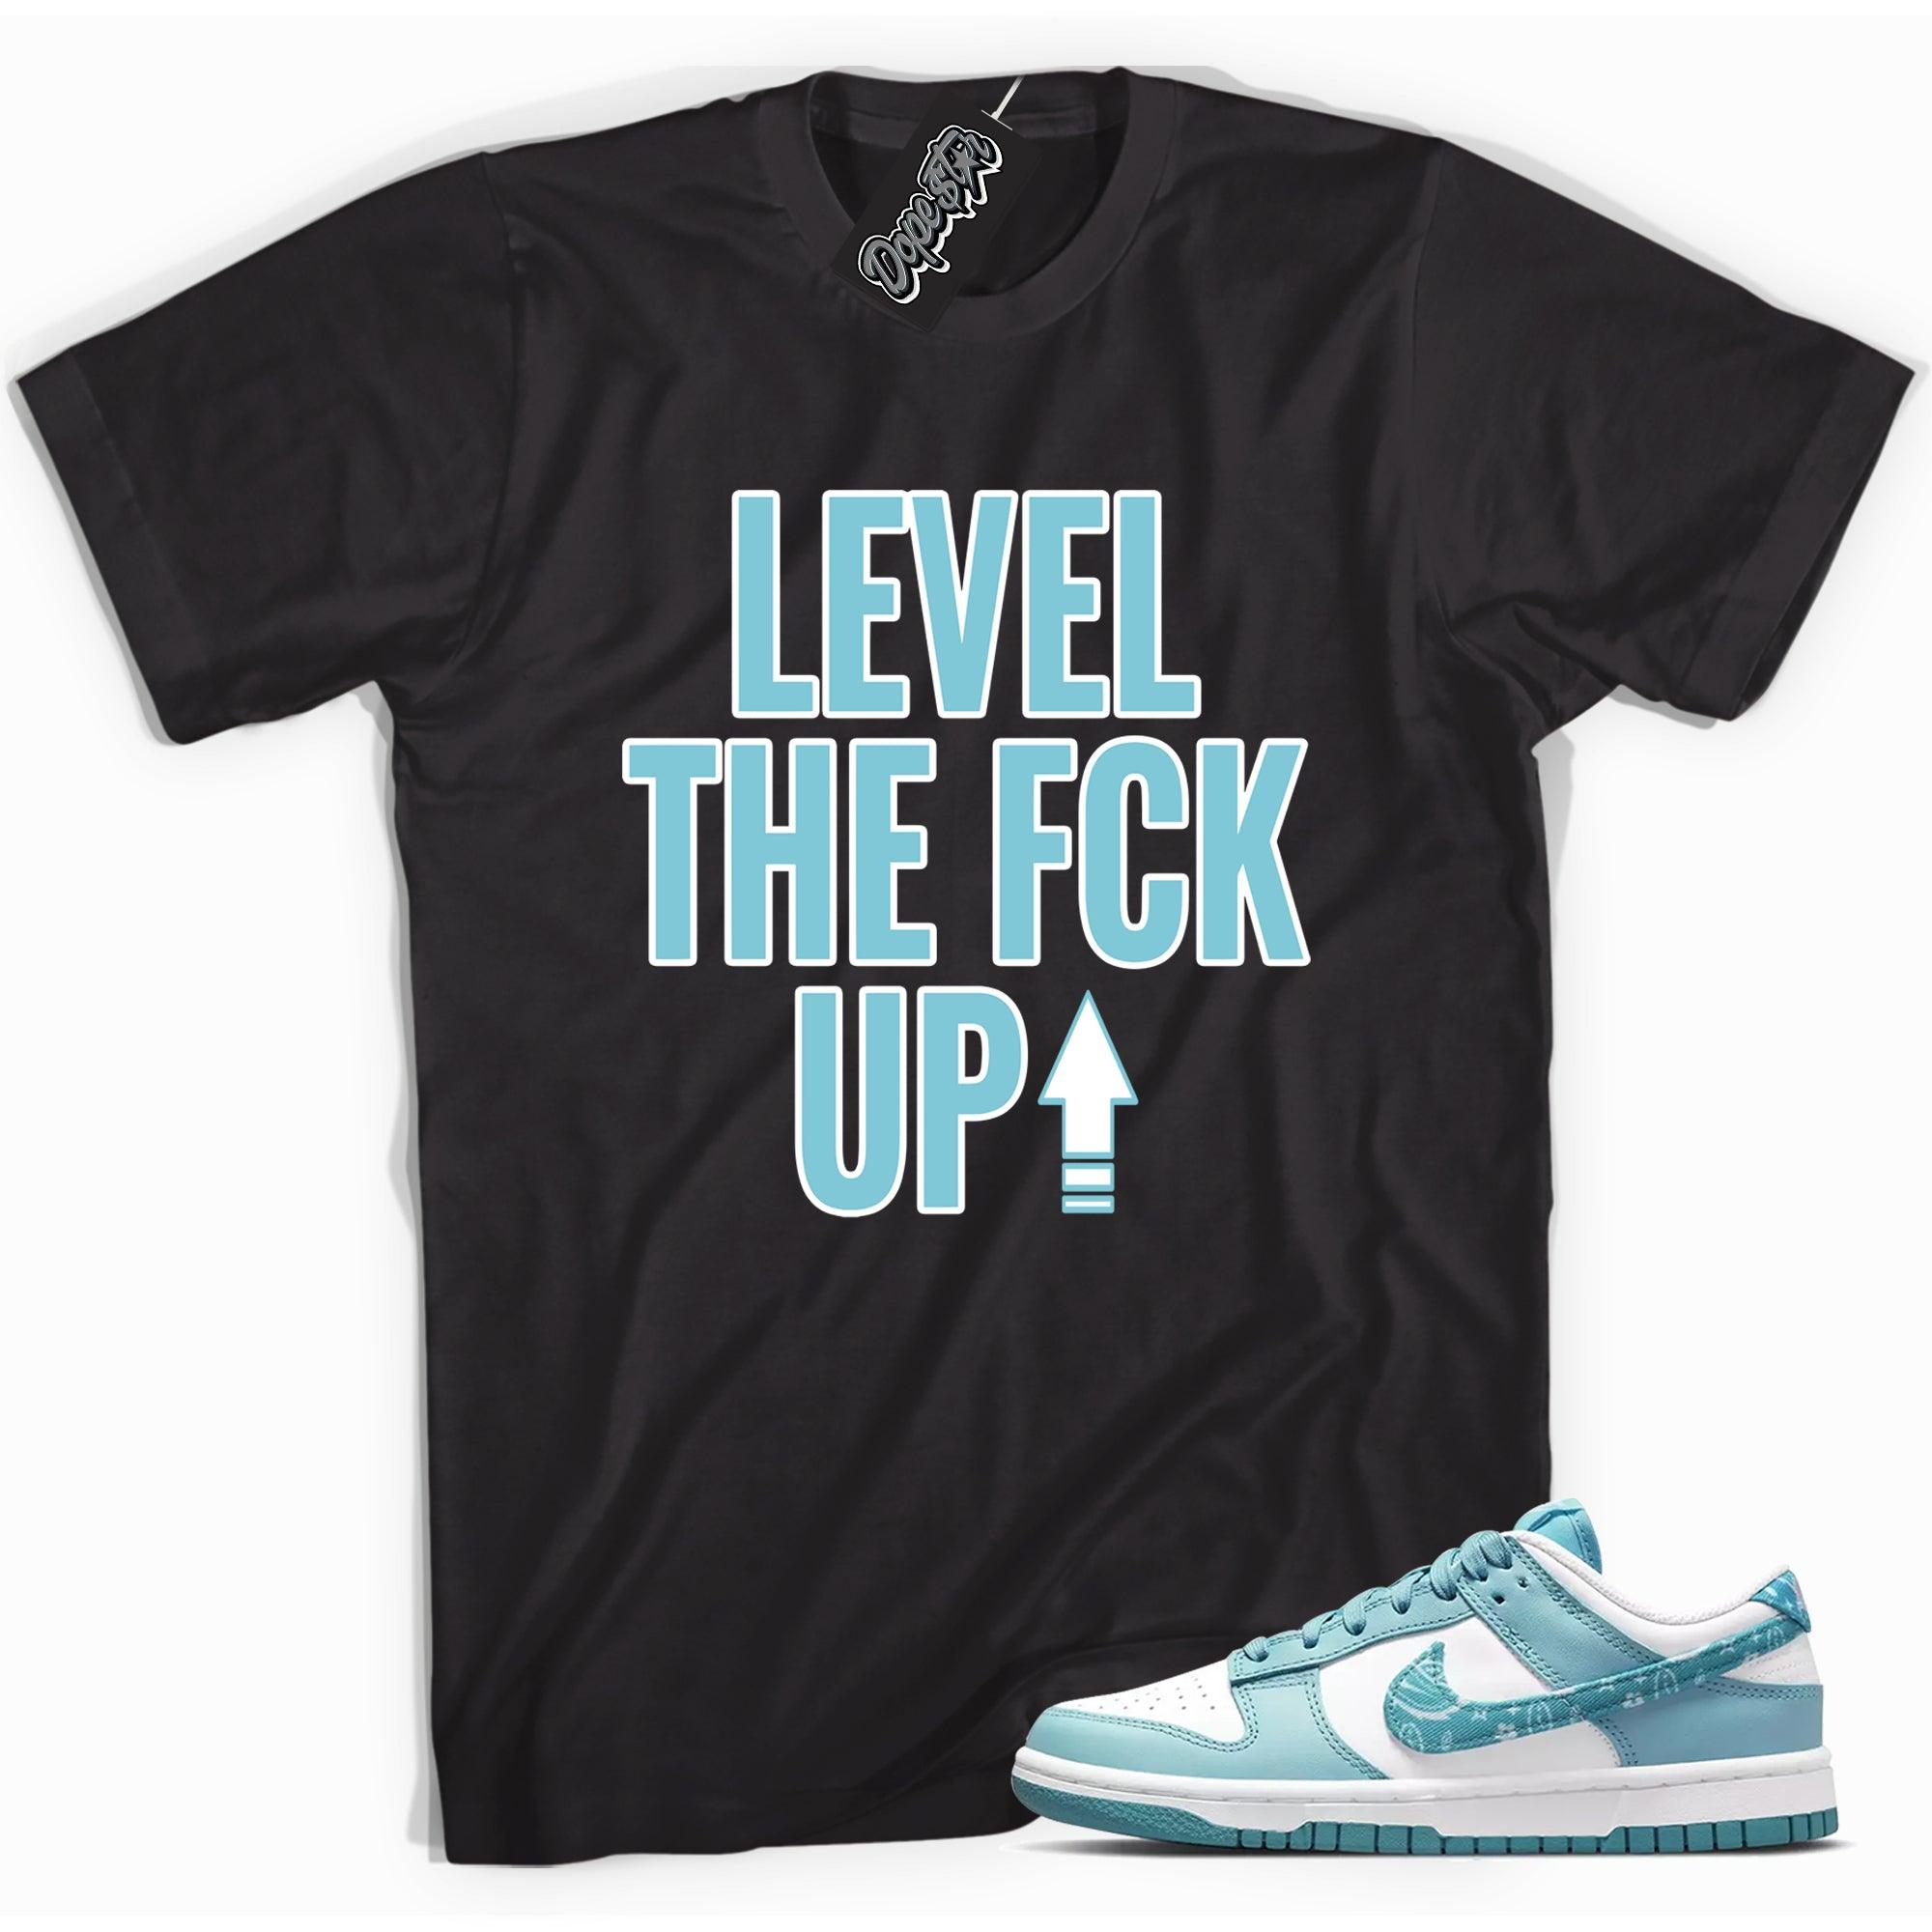 Cool black graphic tee with 'Level Up' print, that perfectly matches Nike Dunk Low Essential Paisley Pack Worn Blue sneakers.